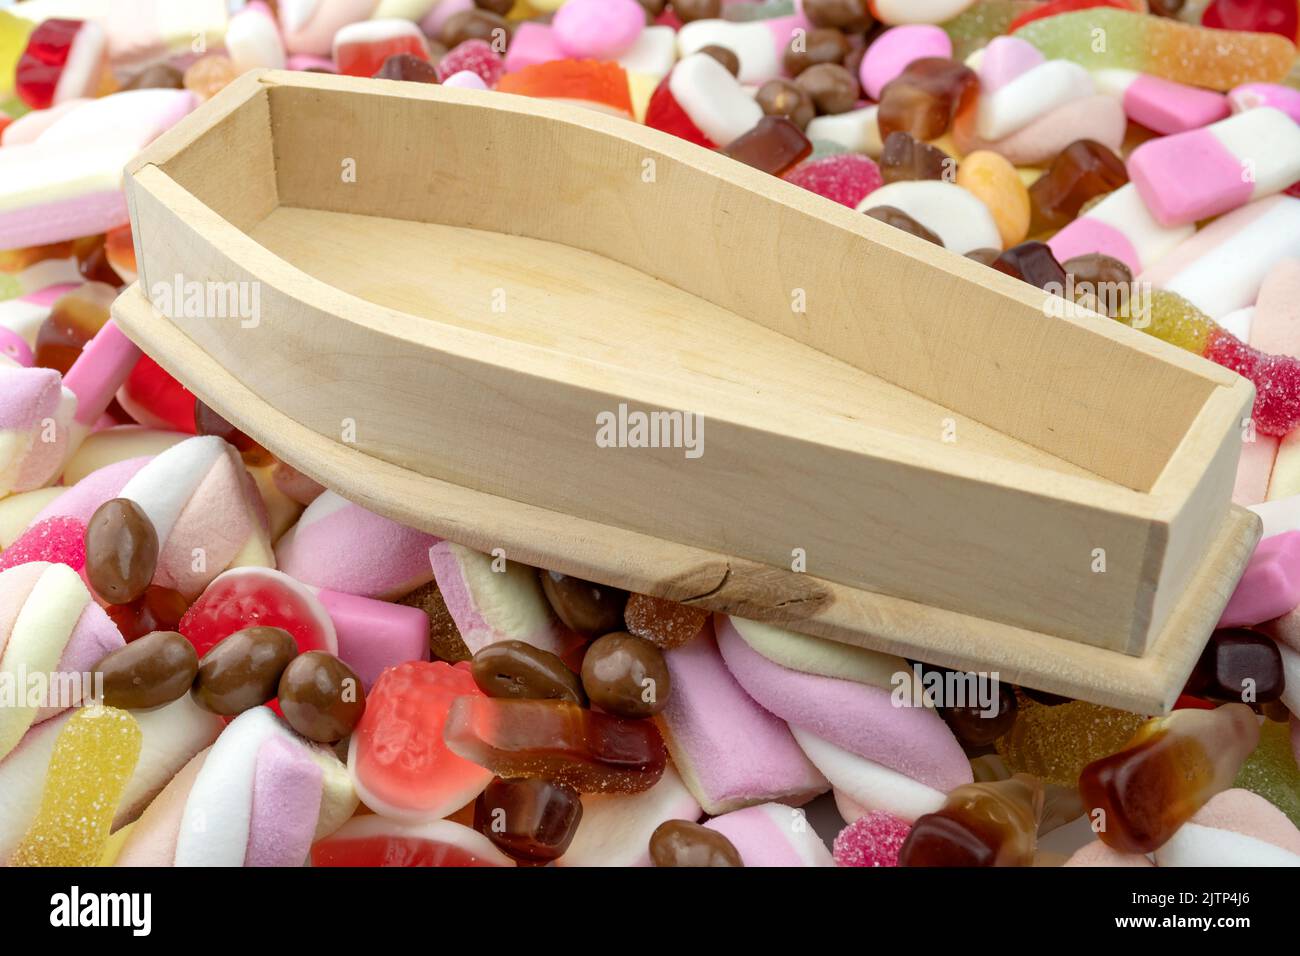 Wood coffin on top of pile of assorted sweets, junk food and candy concept for death caused by diabetes and metabolic disease, obesity due to an unhea Stock Photo